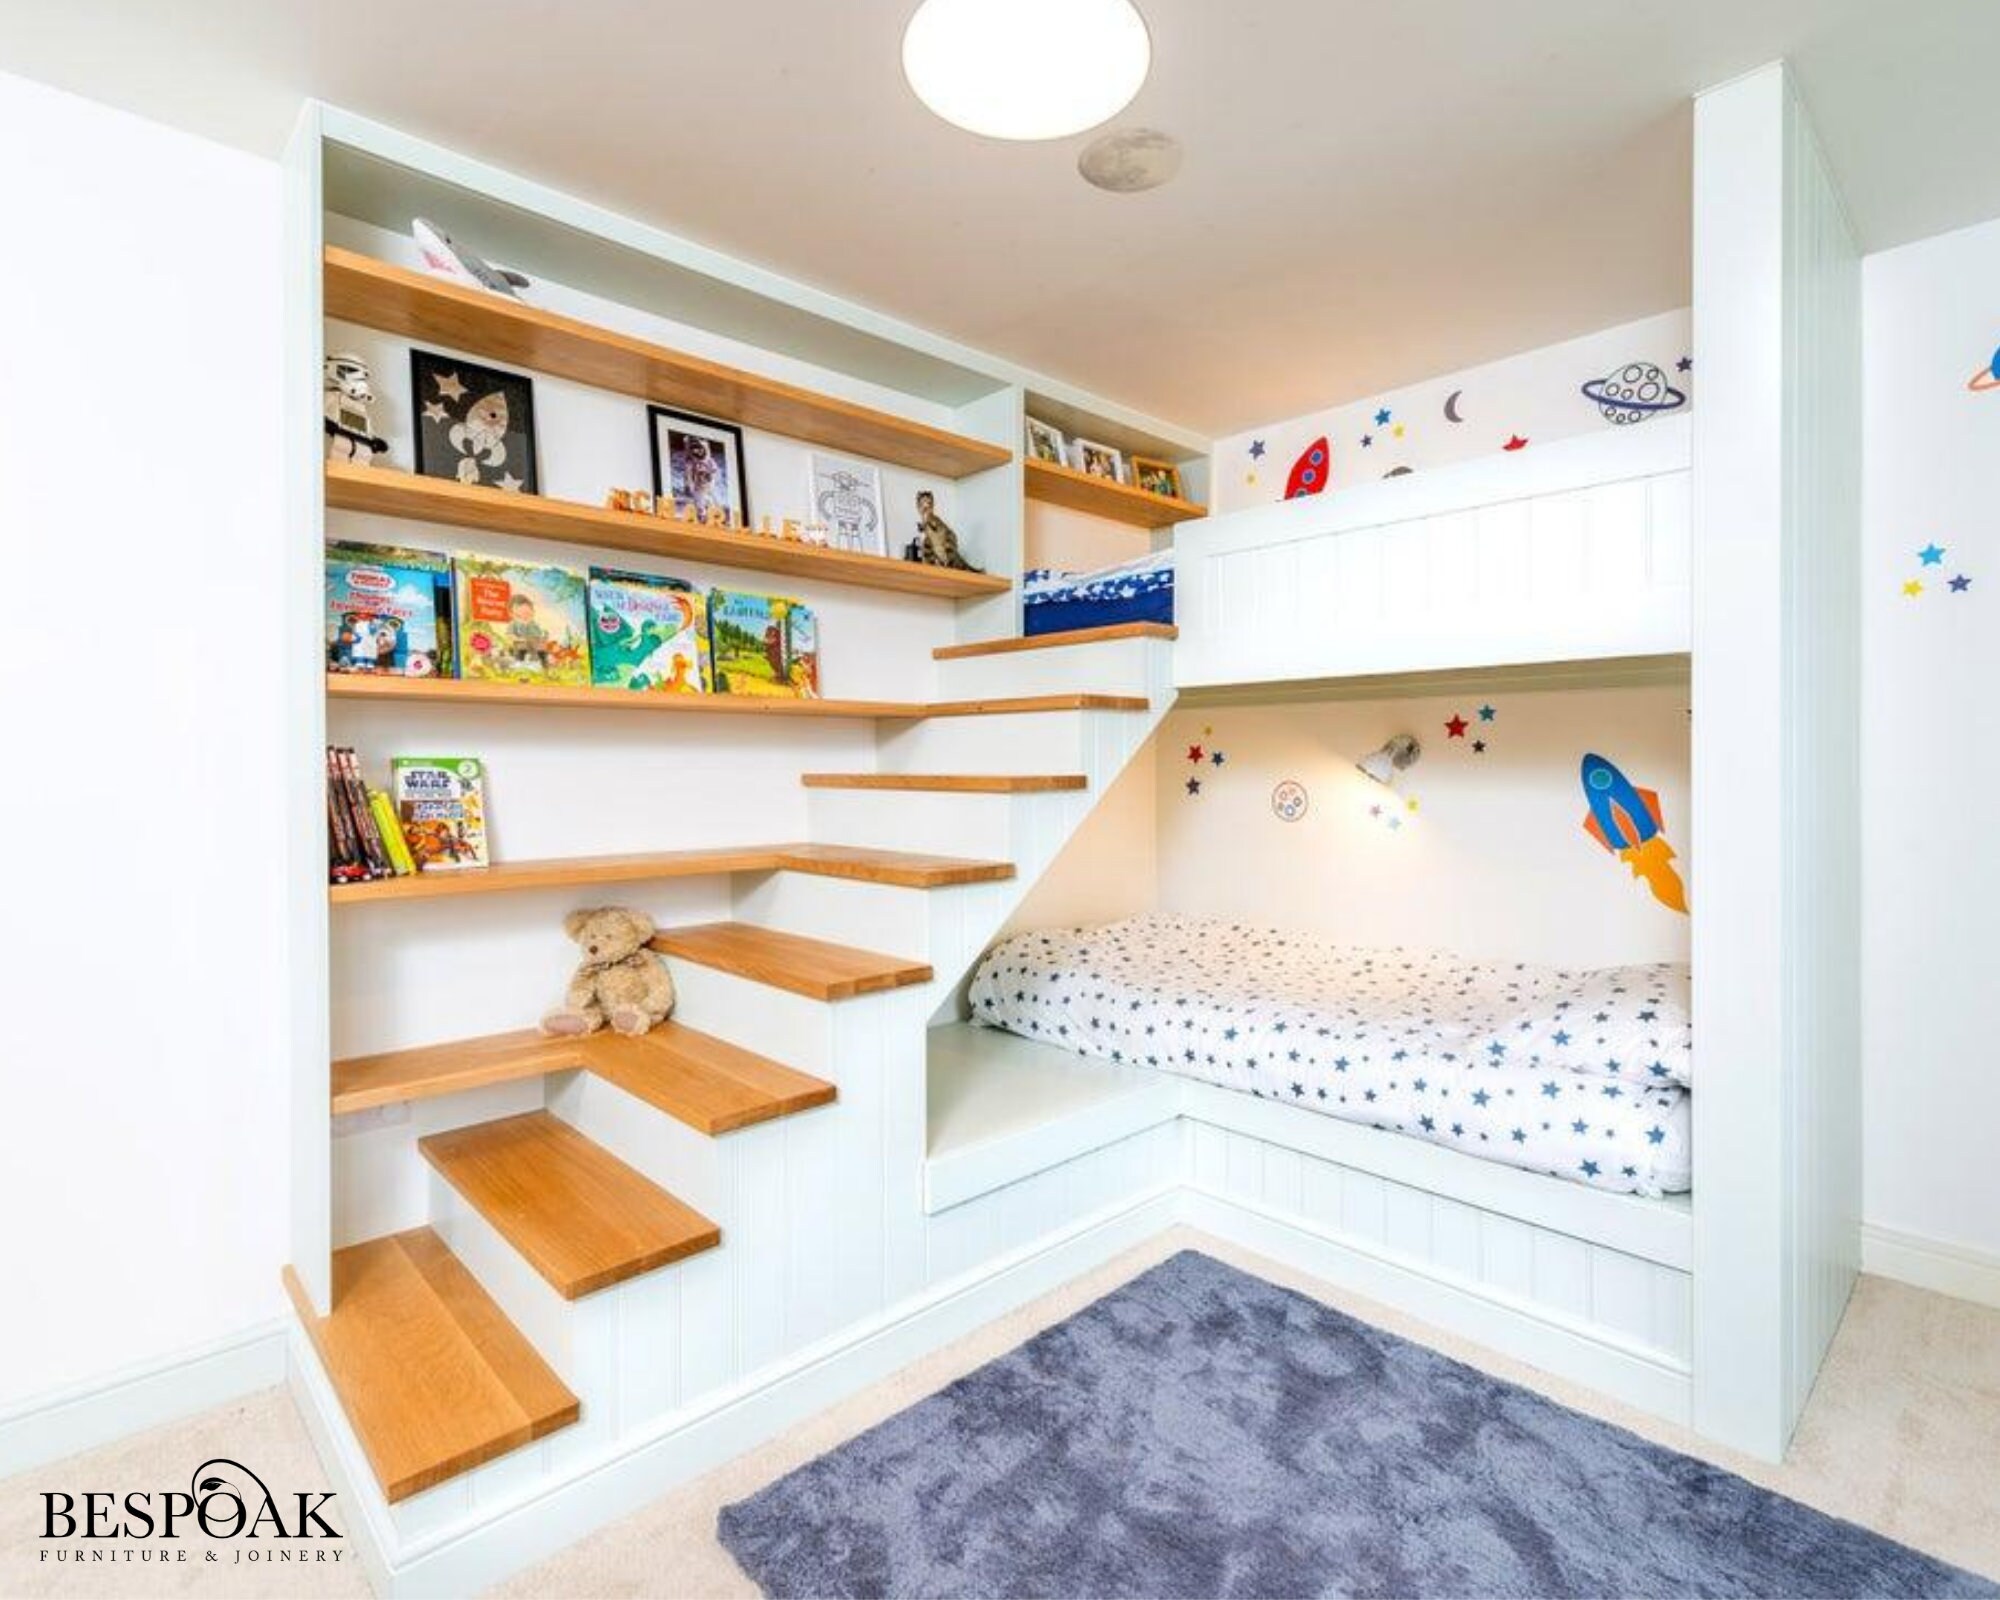 Luxury Bunk Beds With Steps Shelves And, Bunk Beds With Dresser Built In